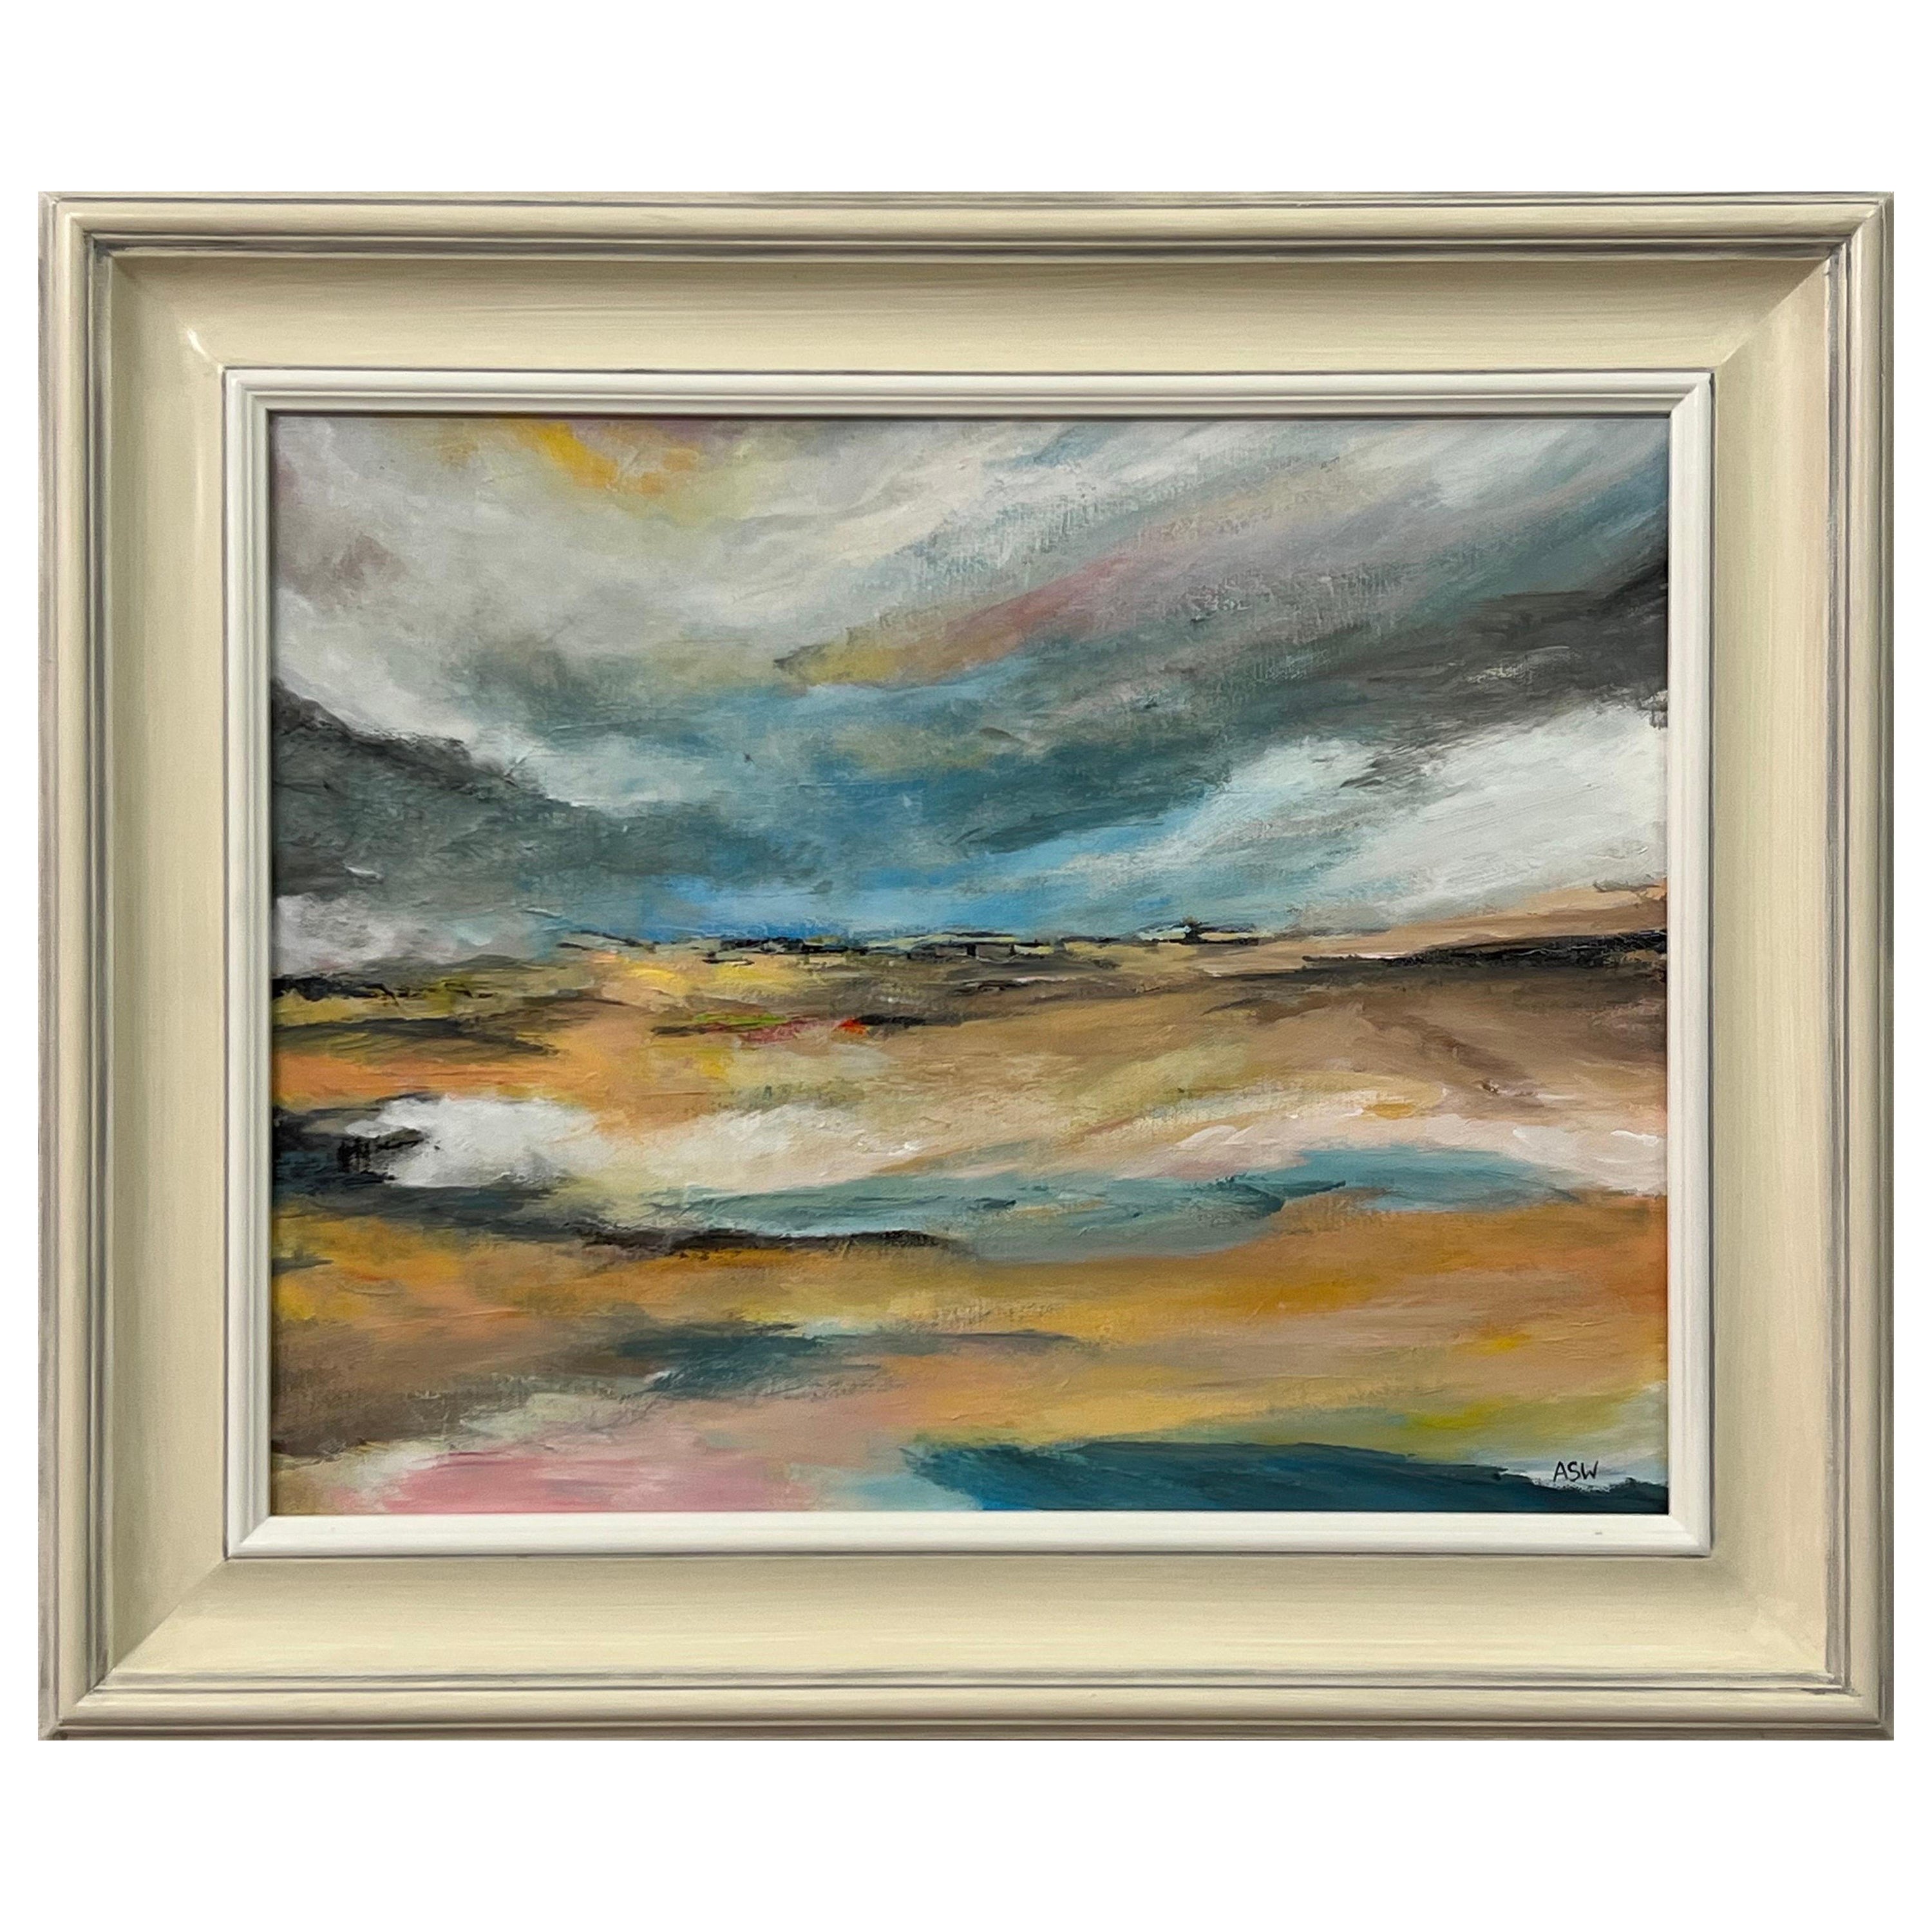 Angela Wakefield Abstract Painting - Atmospheric Abstract Landscape Seascape Art of England using Blue & Warm Yellows